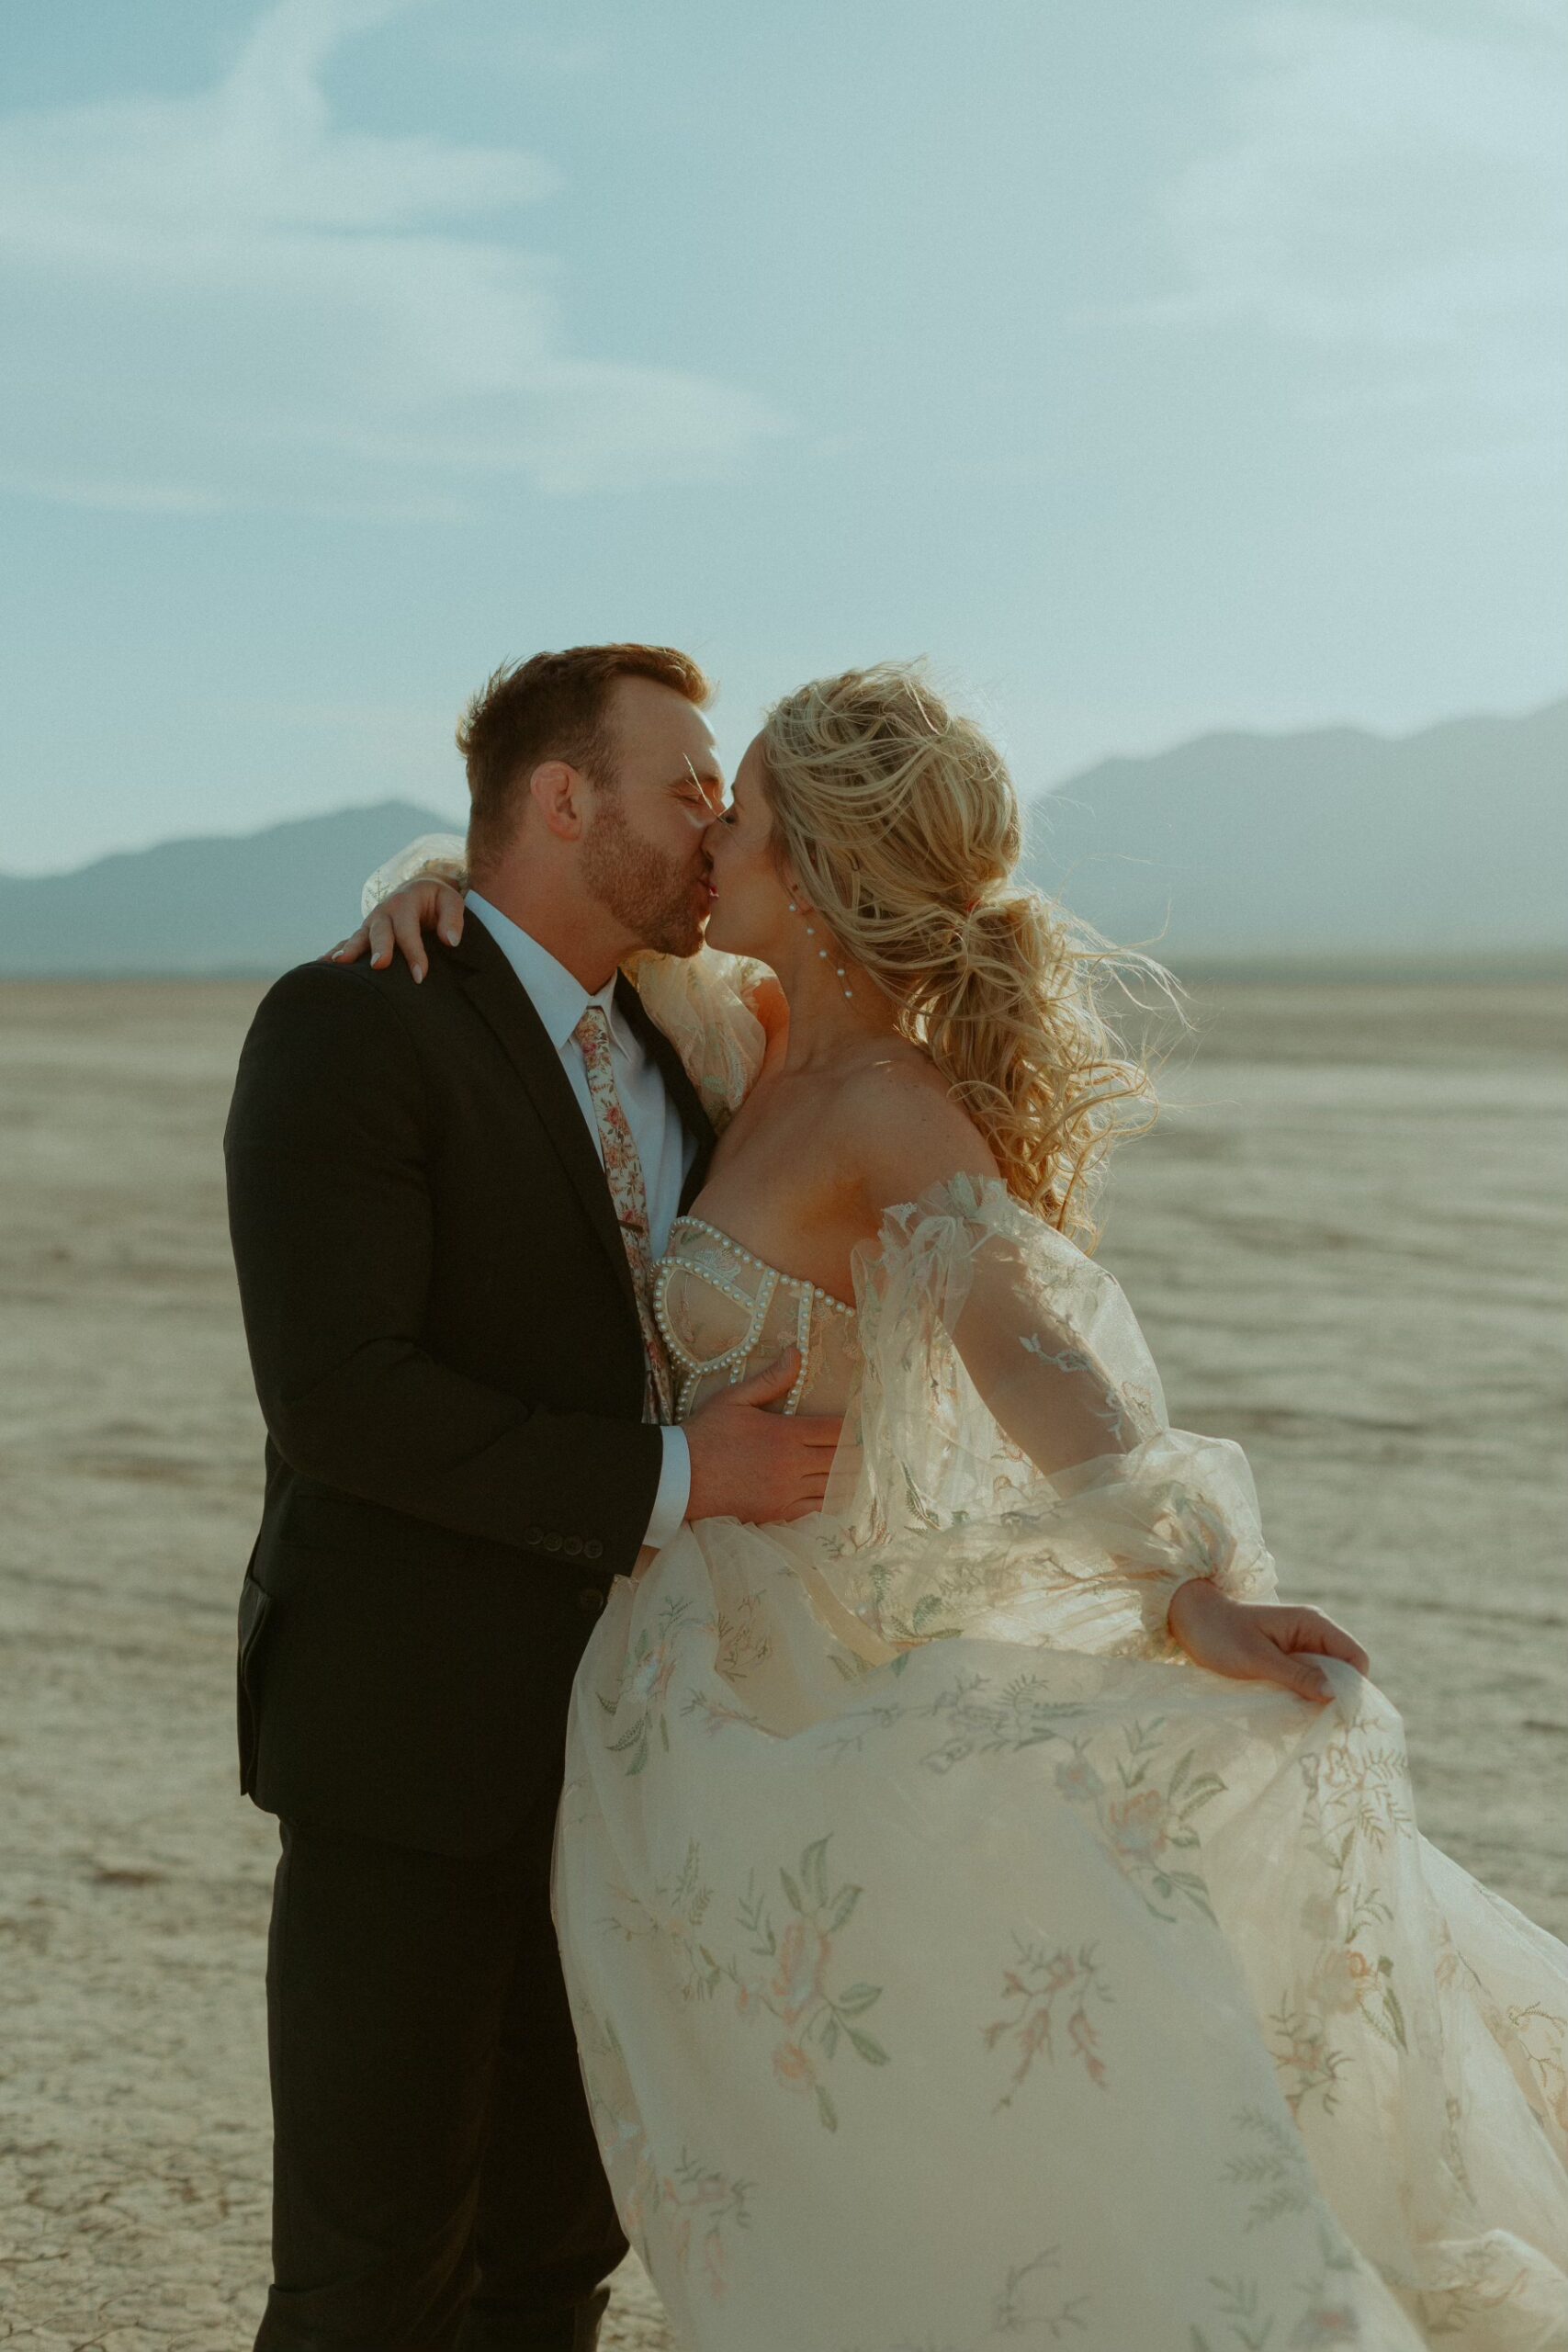 Bride and groom eloping in nevada